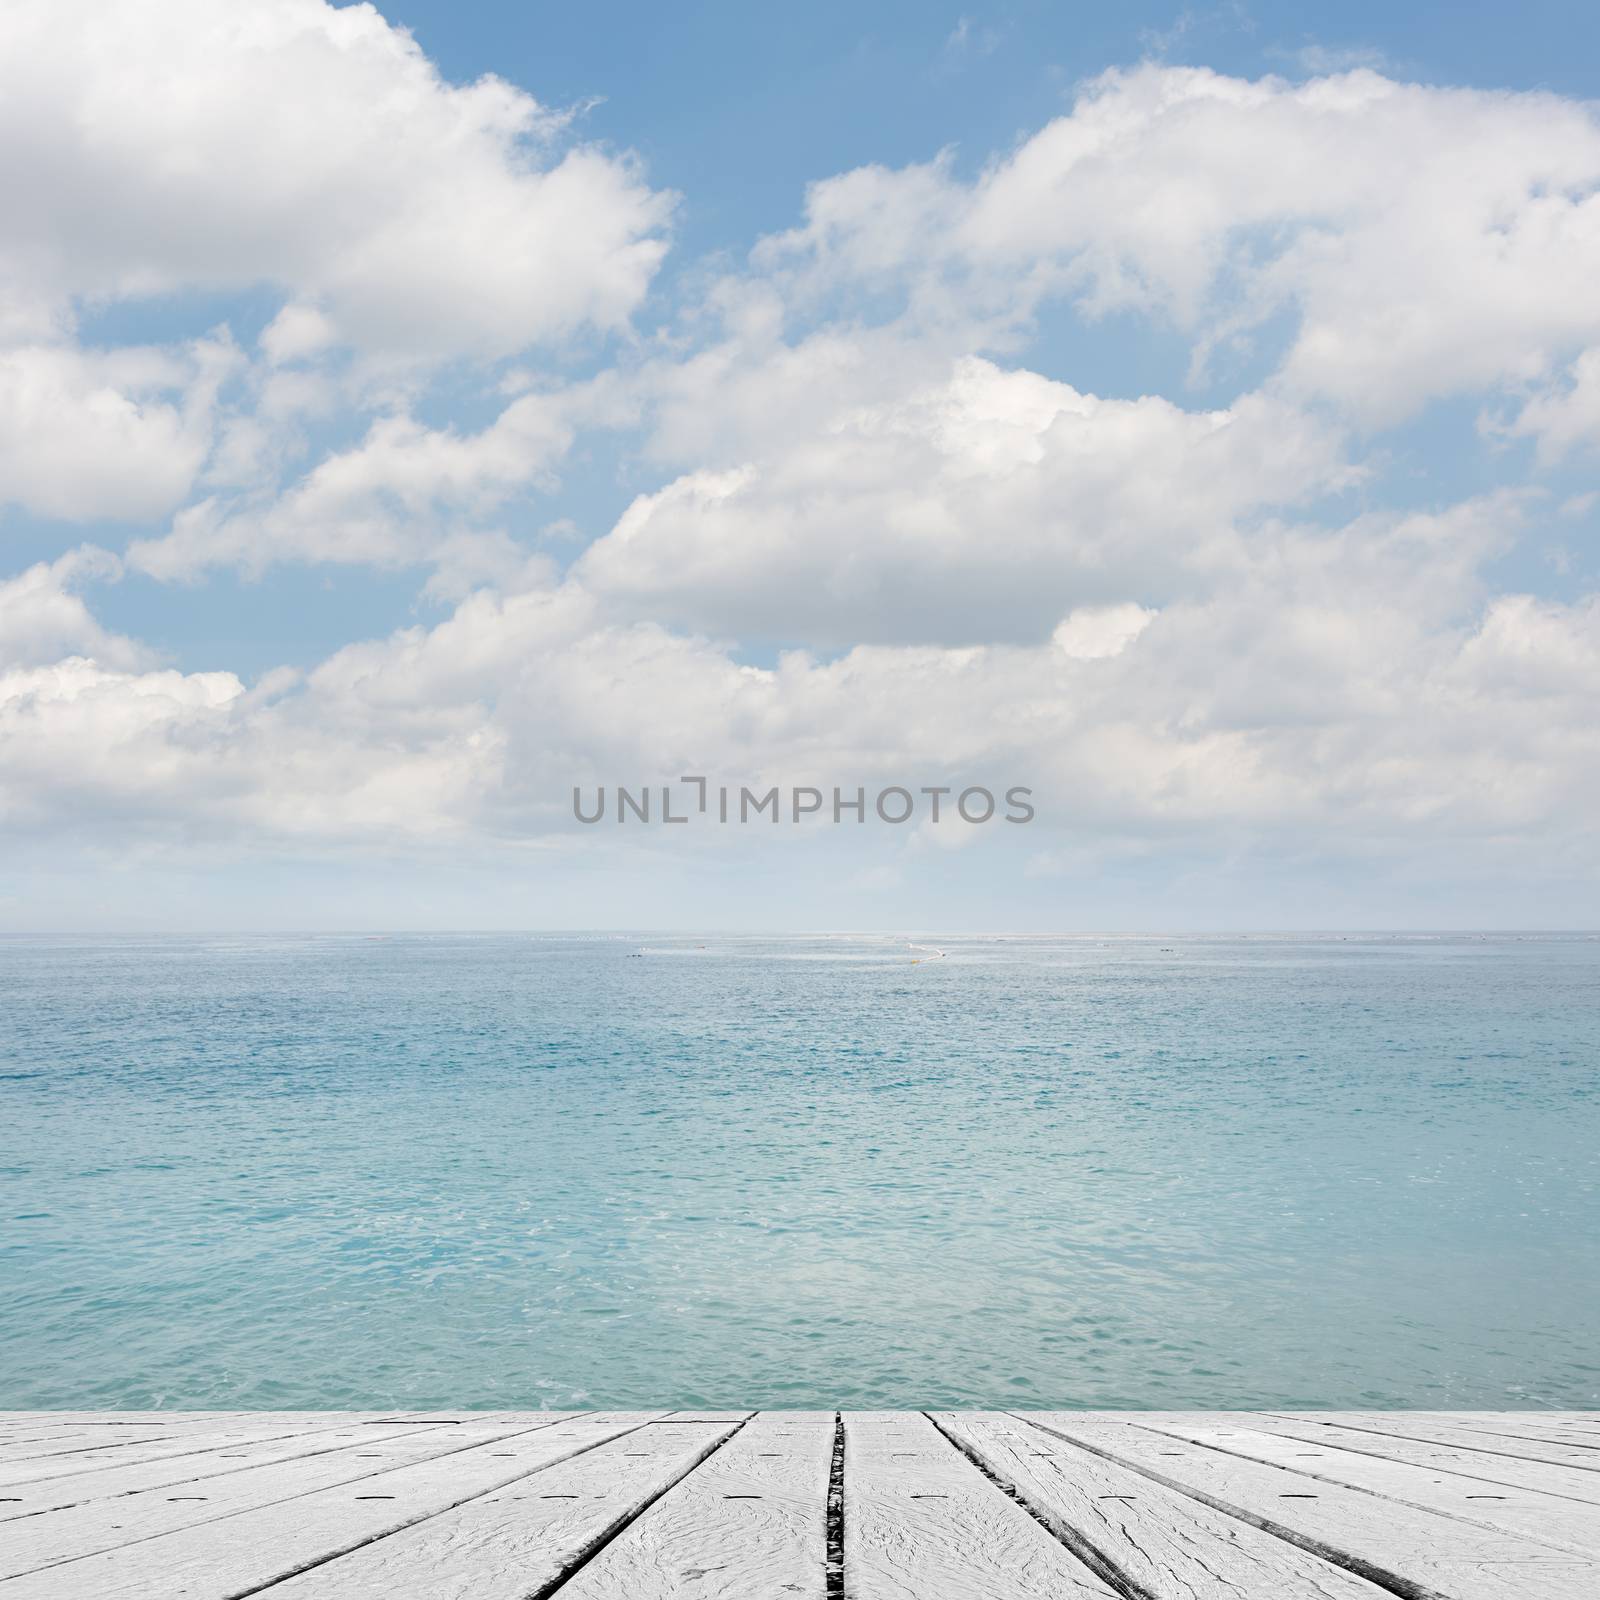 Empty wooden deck table with copyspace under sunny cloudy sky in the beach, focus on the wooden ground.